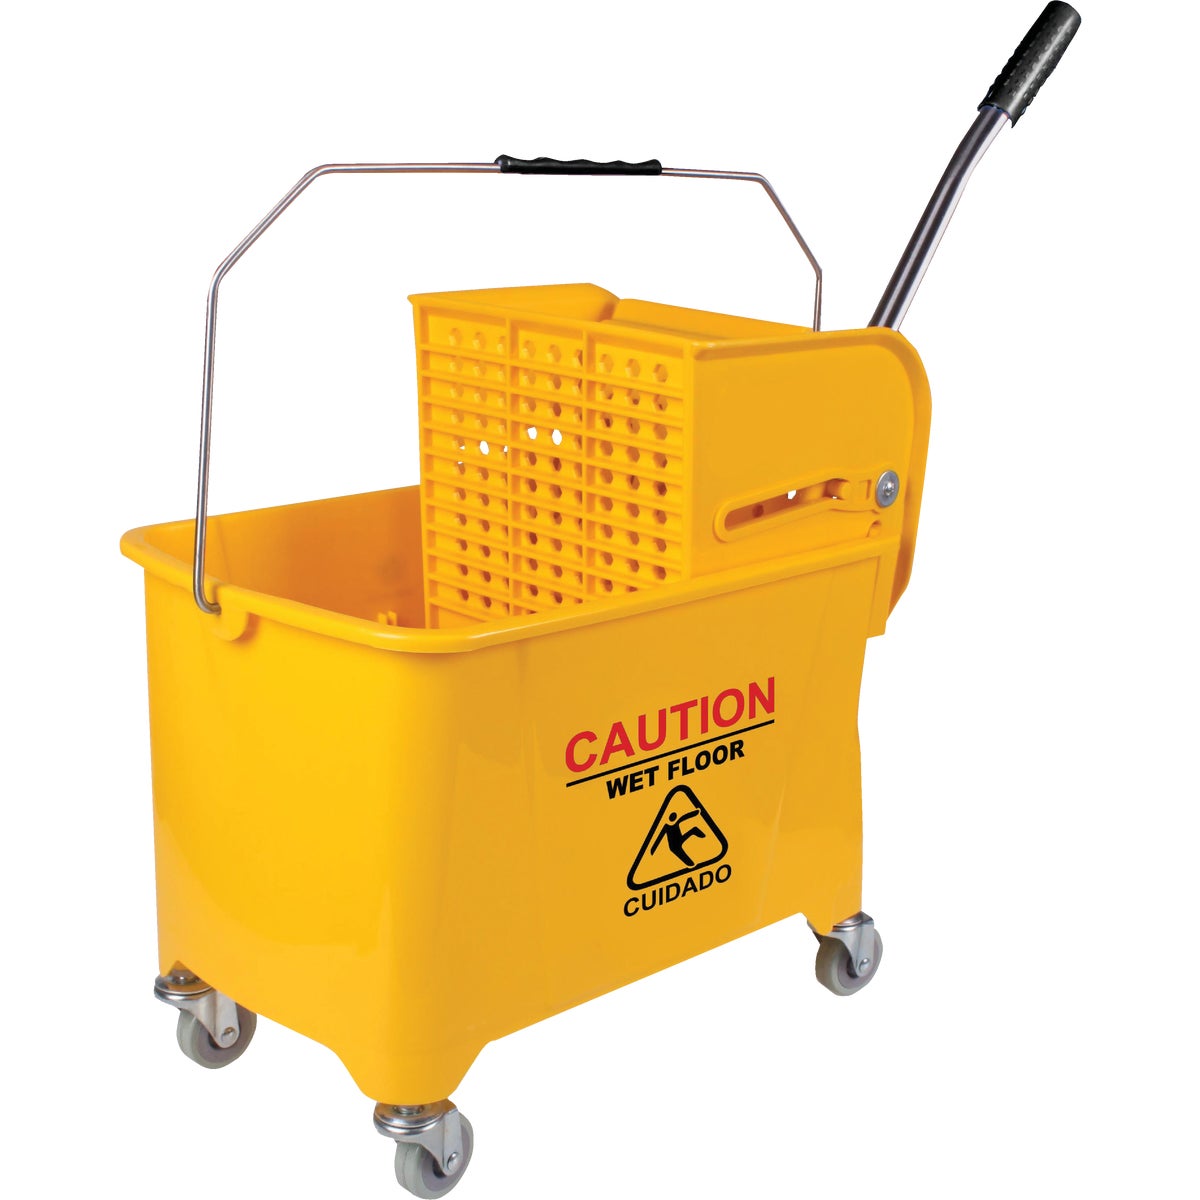 Item 627070, 21-quart, corrosion resistant, yellow compact mopping bucket with wringer.